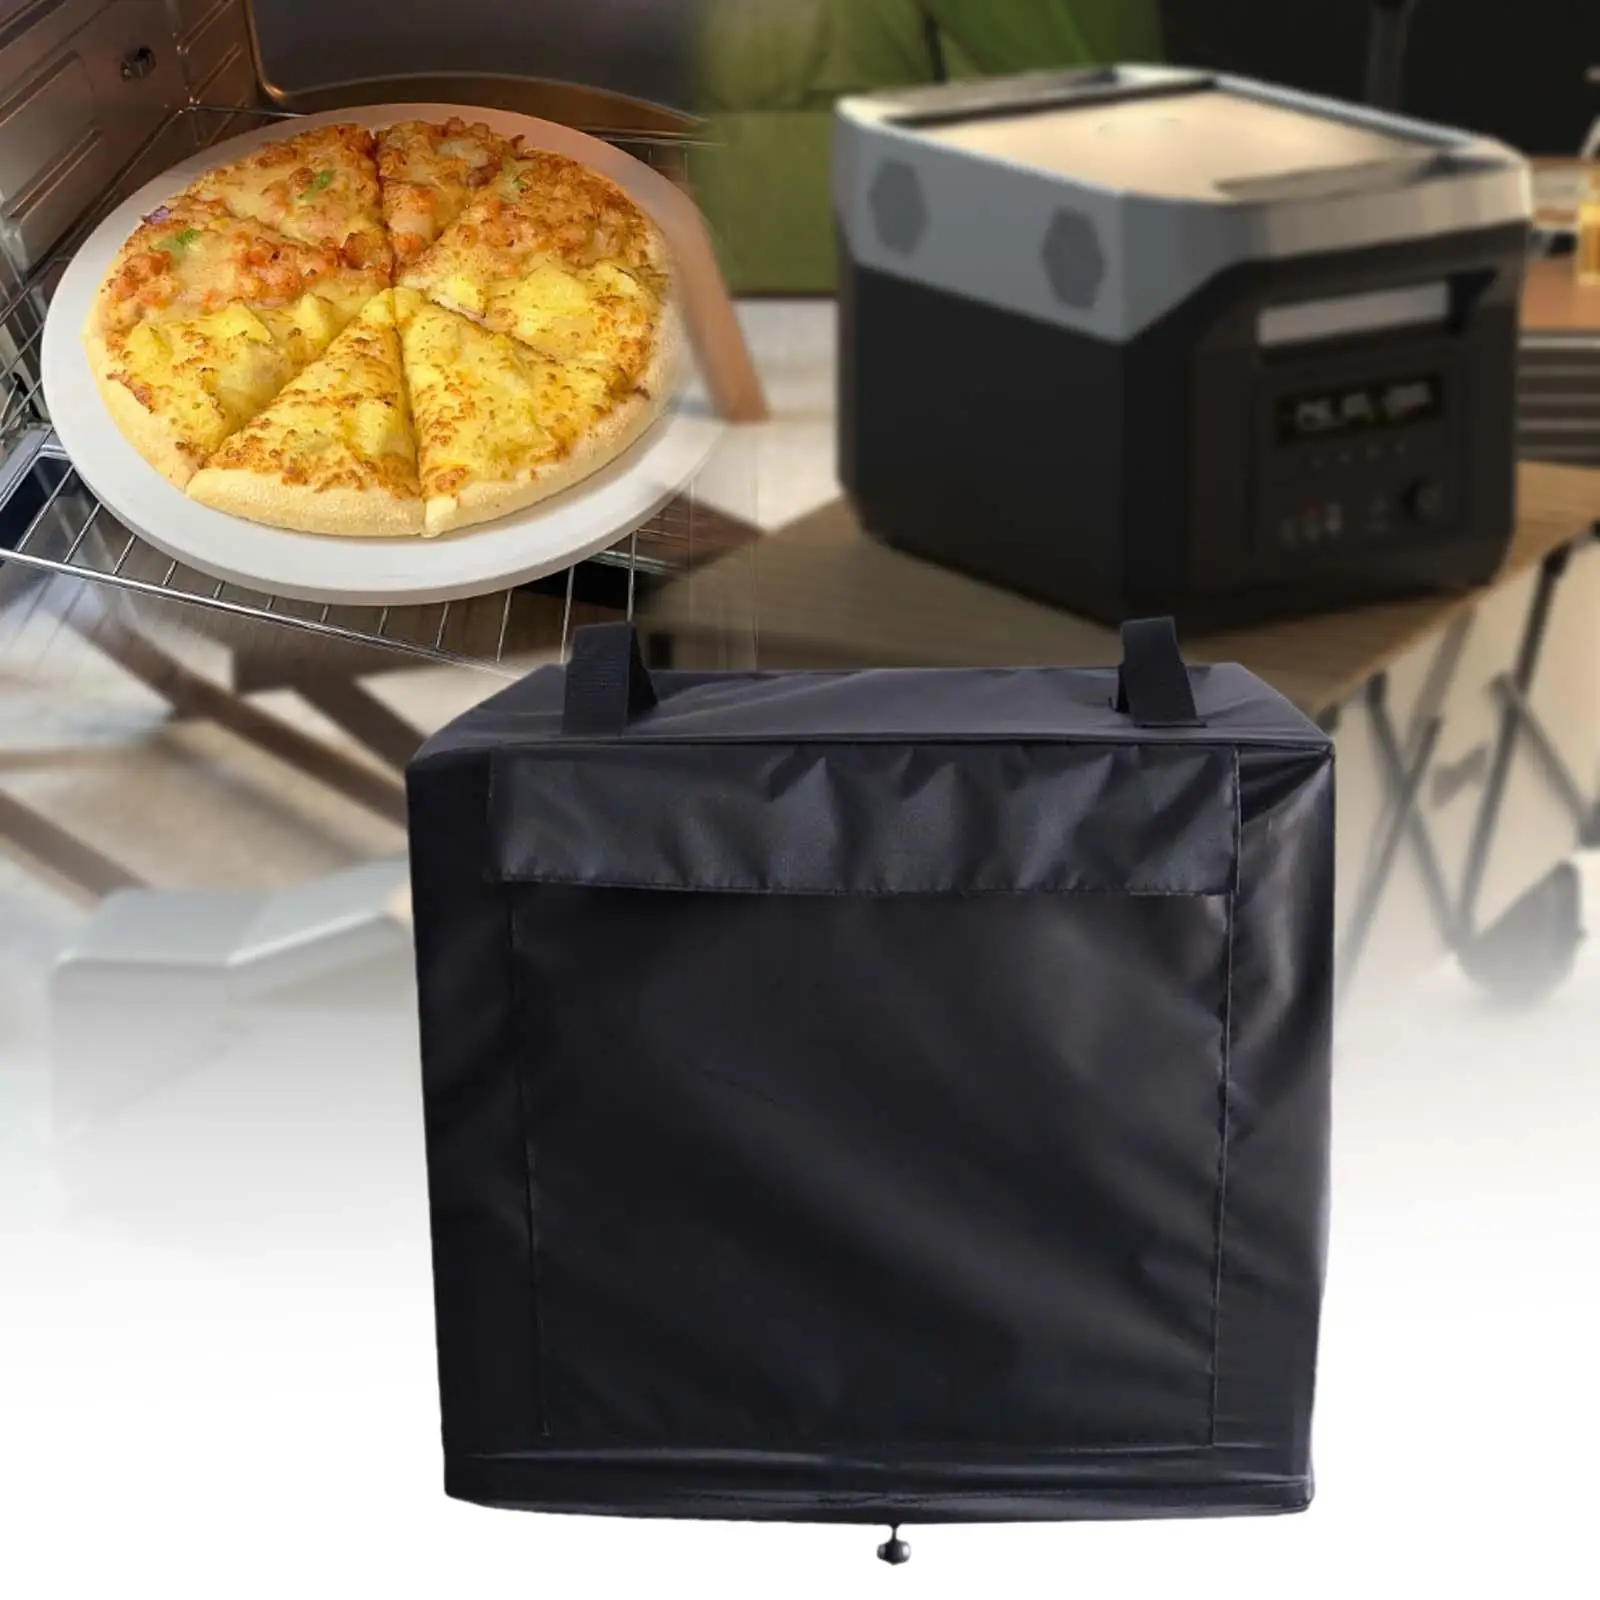 Pizza Oven Cover Outside Accessories Square with Storage Pockets Portable Heavy Duty Waterproof Durable Black Grill Cover